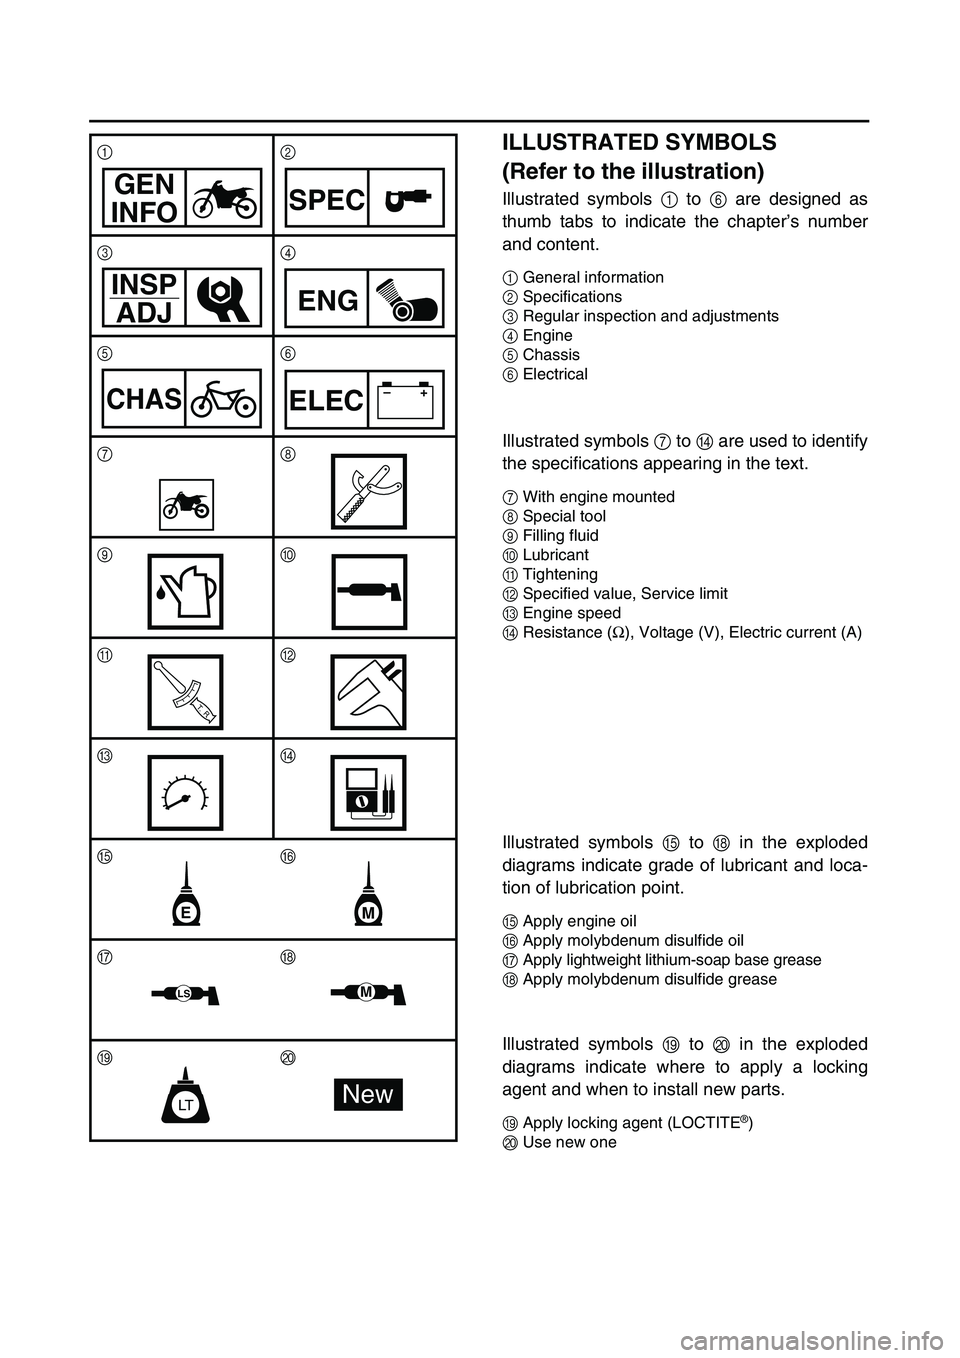 YAMAHA TTR125 2007  Owners Manual  
ILLUSTRATED SYMBOLS 
(Refer to the illustration) 
Illustrated symbols  
1  
 to   
6  
 are designed as
thumb tabs to indicate the chapter’s number
and content. 
1 
General information 
2 
Specifi